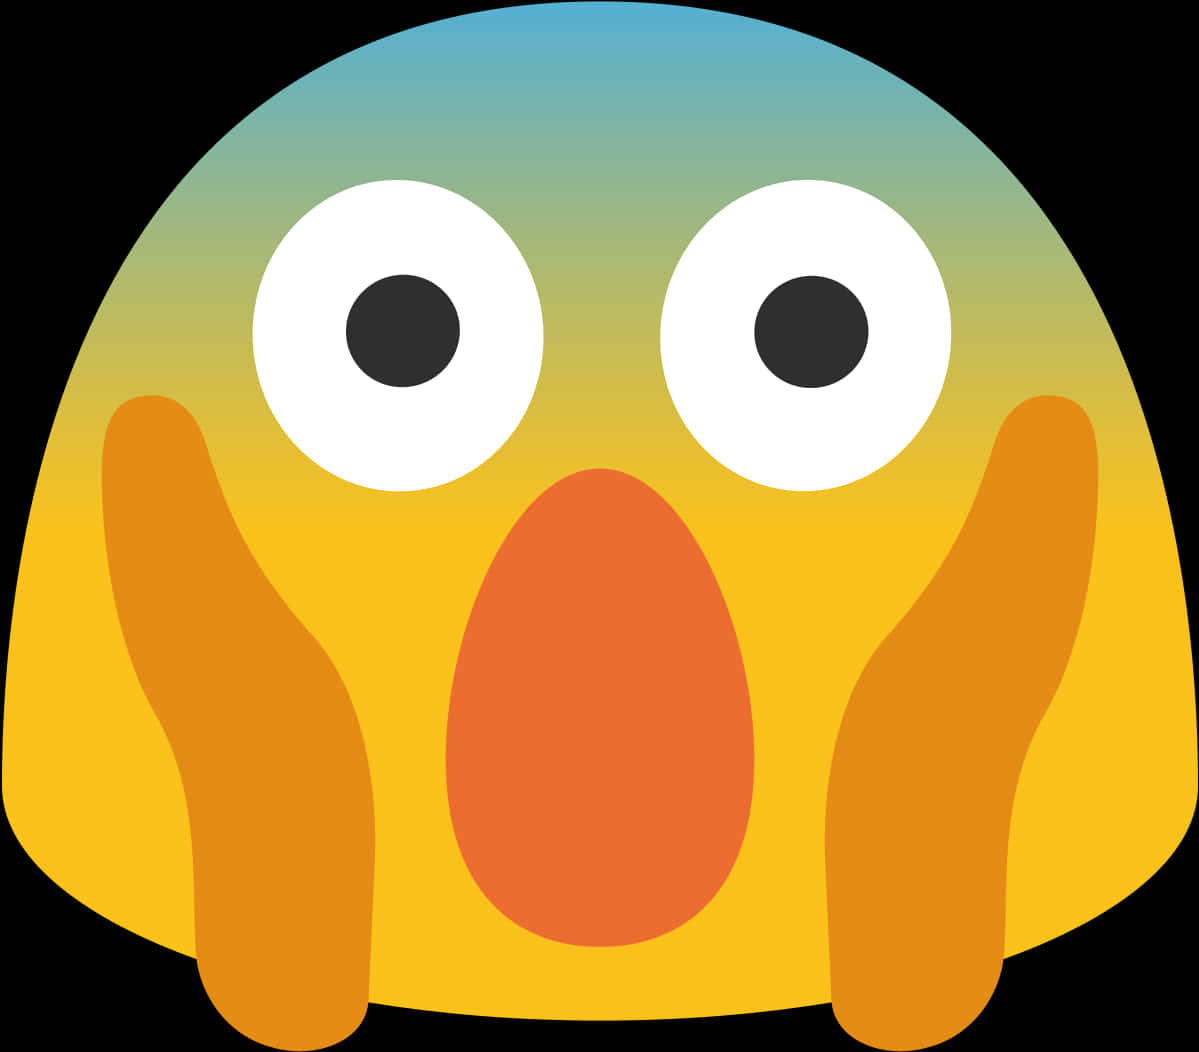 Surprised Cartoon Face Graphic PNG